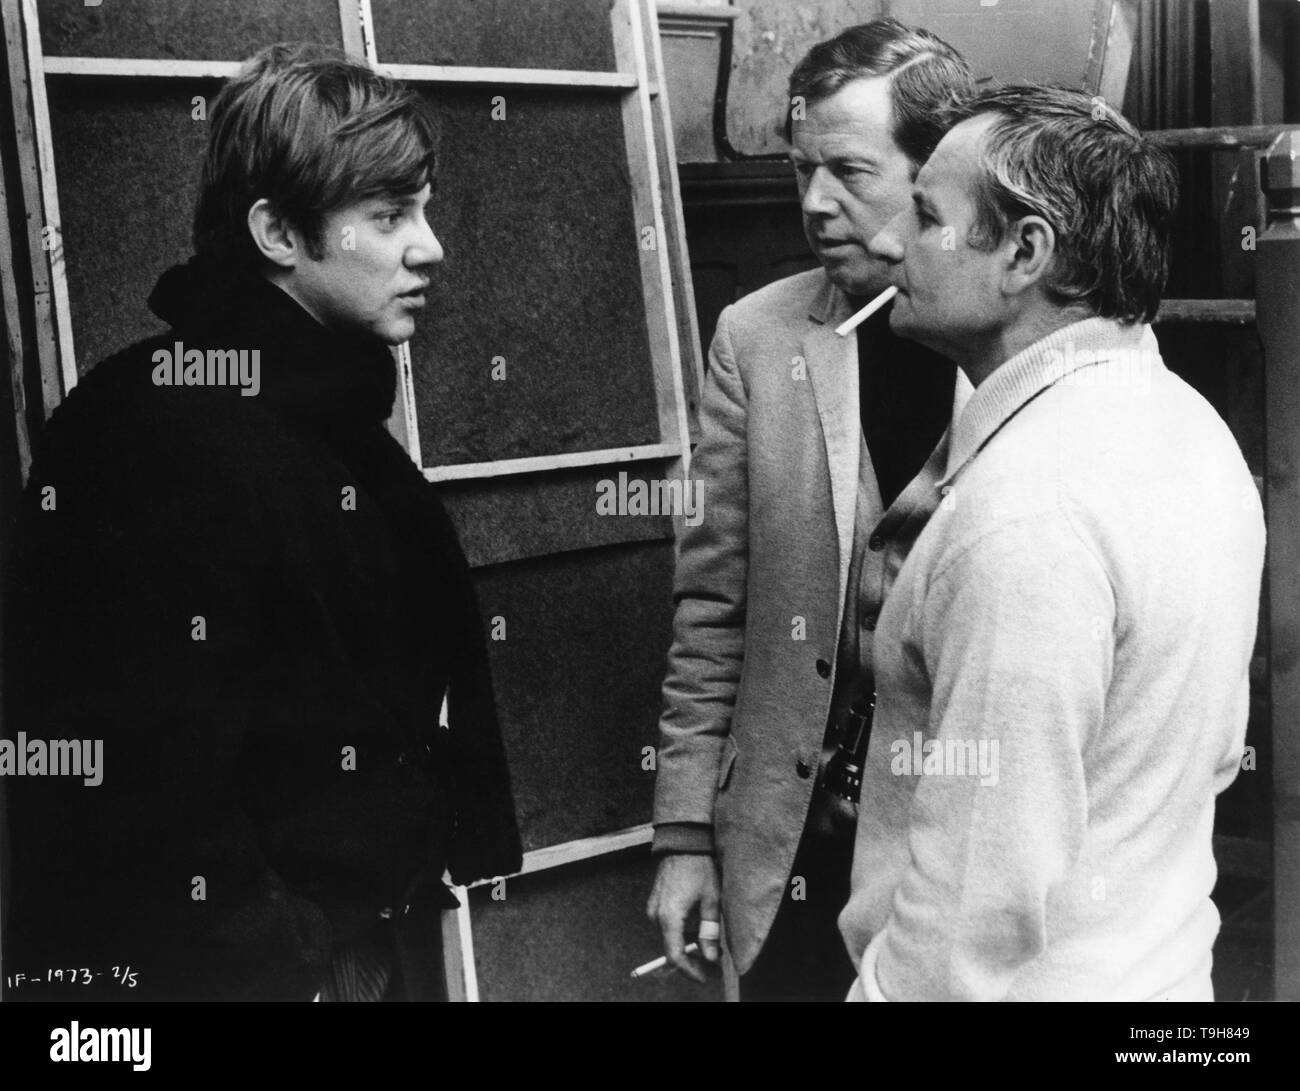 Malcolm McDowell as Mick Travis producer Michael Medwin and director Lindsay Anderson IF …. 1968 on set filming candid screenplay David Sherwin Memorial Enterprises / Paramount British Pictures Stock Photo